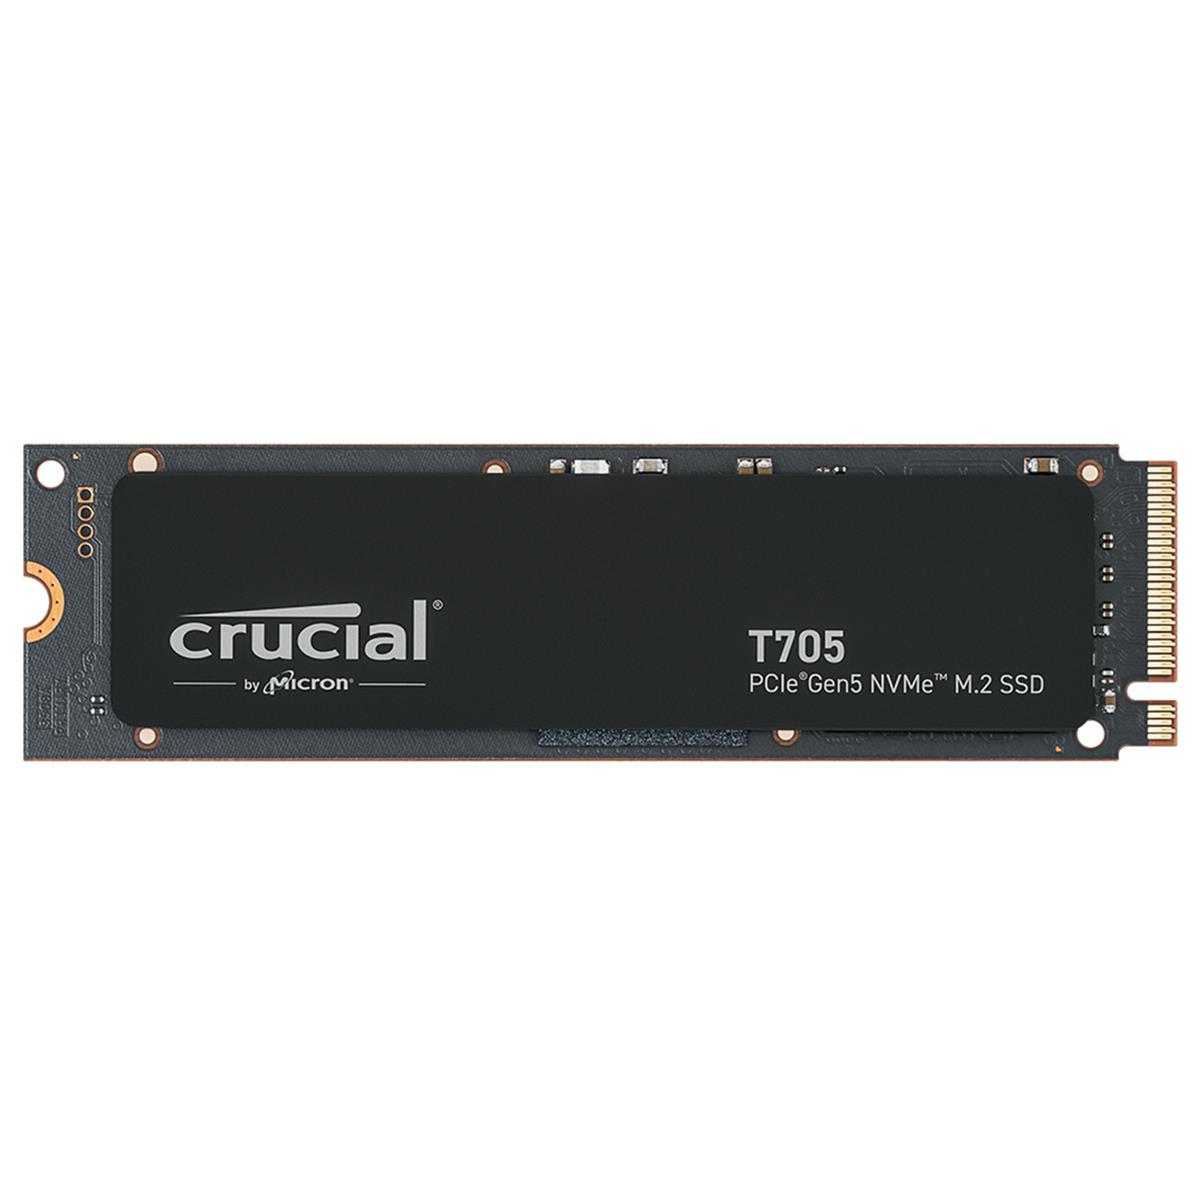 Image of Crucial T705 PCIe Gen5 NVMe M.2 SSD Internal Gaming SSD 2TB Without Heatsink